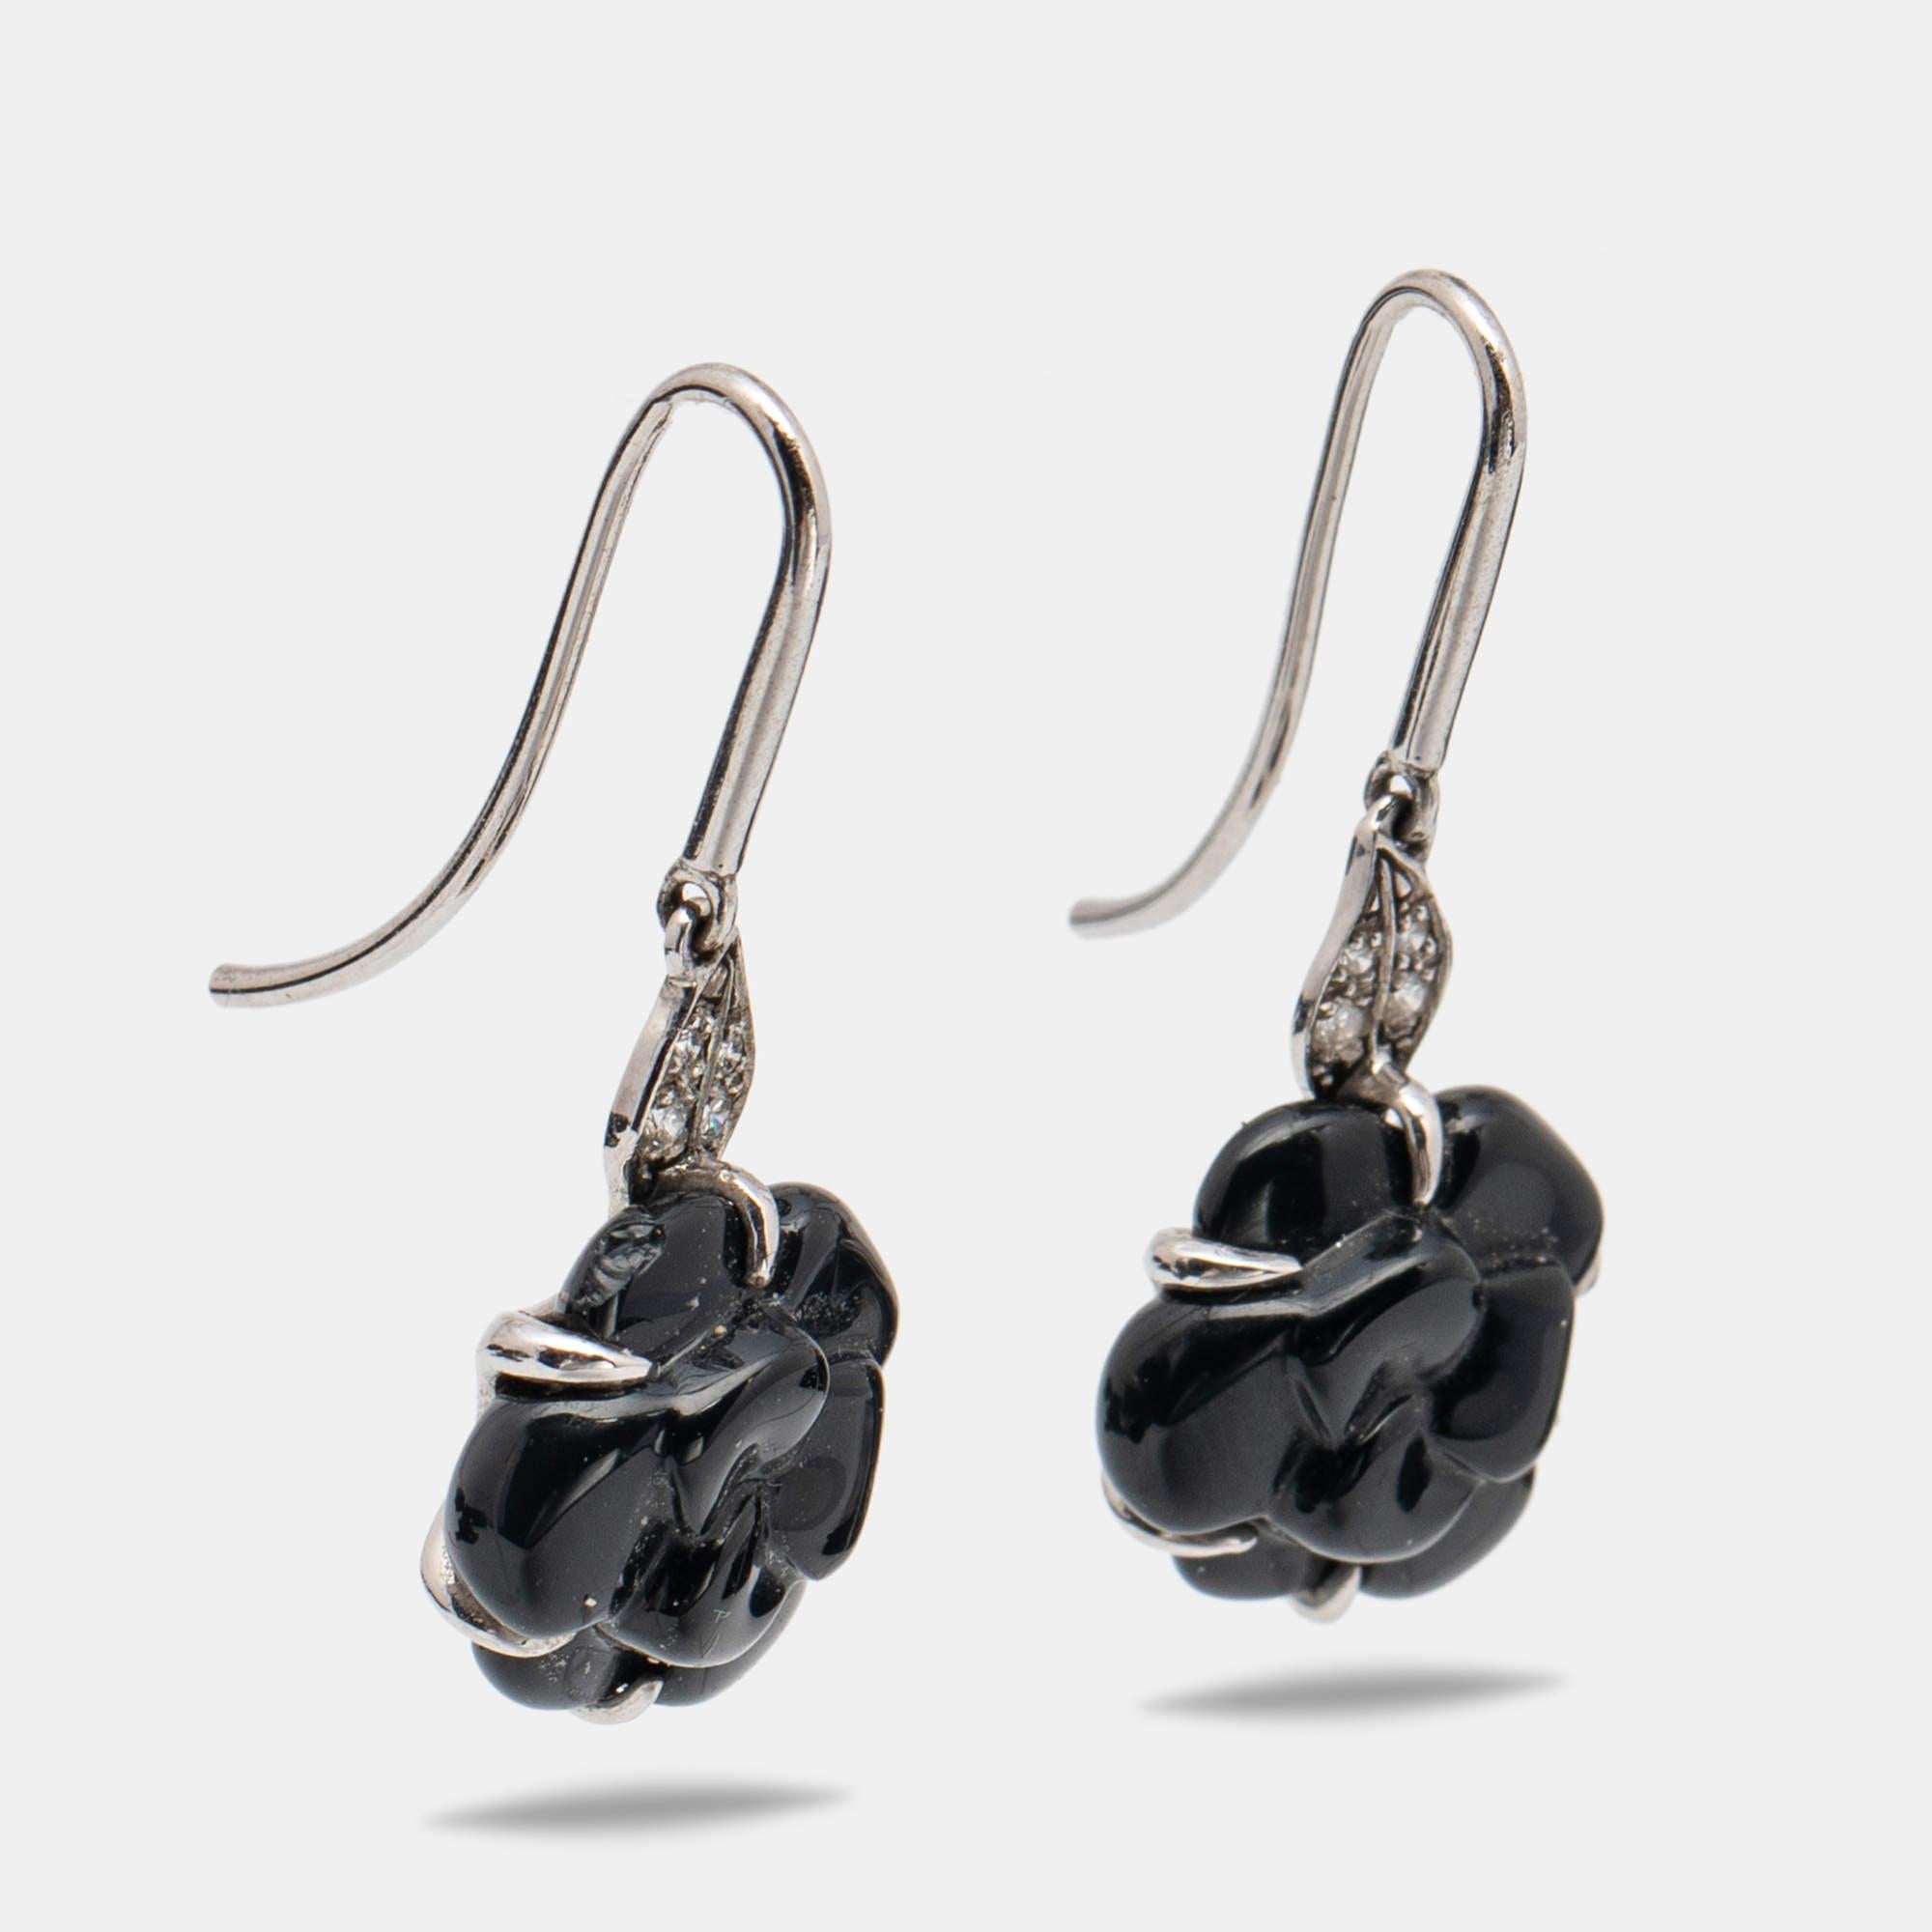 This Chanel pair of earrings speaks beauty with its details. Crafted using 18k white gold, the Chanel earrings have an onyx camellia flower drop. Diamonds give them a grand update. The pair will be a wonderful style companion as well as an